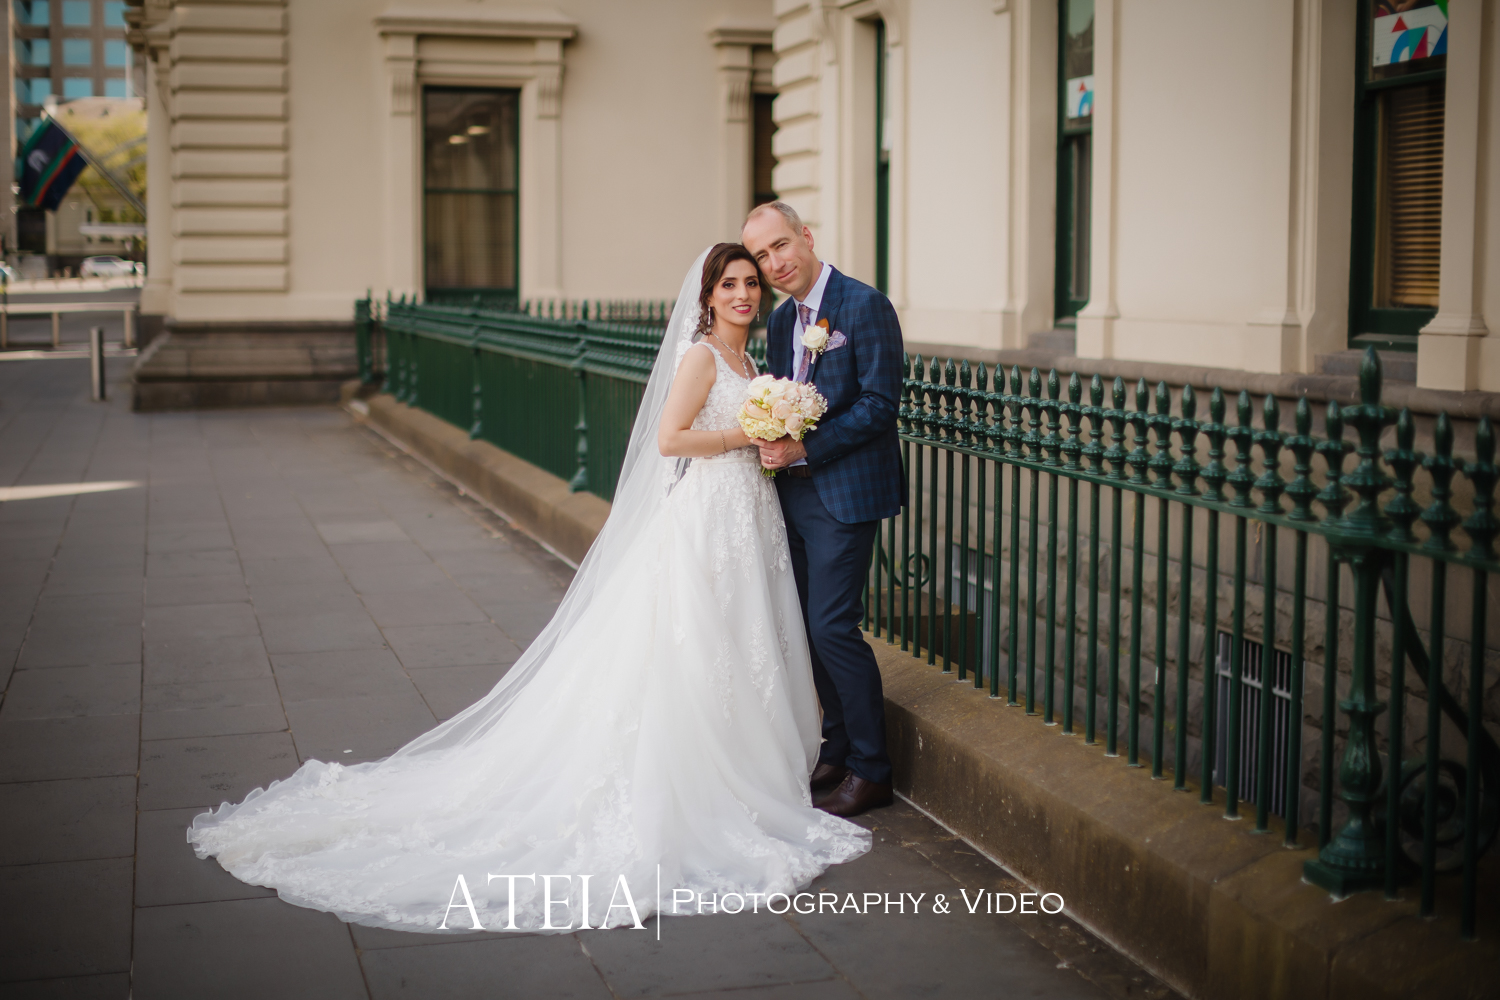 , Fahimeh and Peter&#8217;s wedding photography at Windsor Hotel Melbourne captured by ATEIA Photography &#038; Video